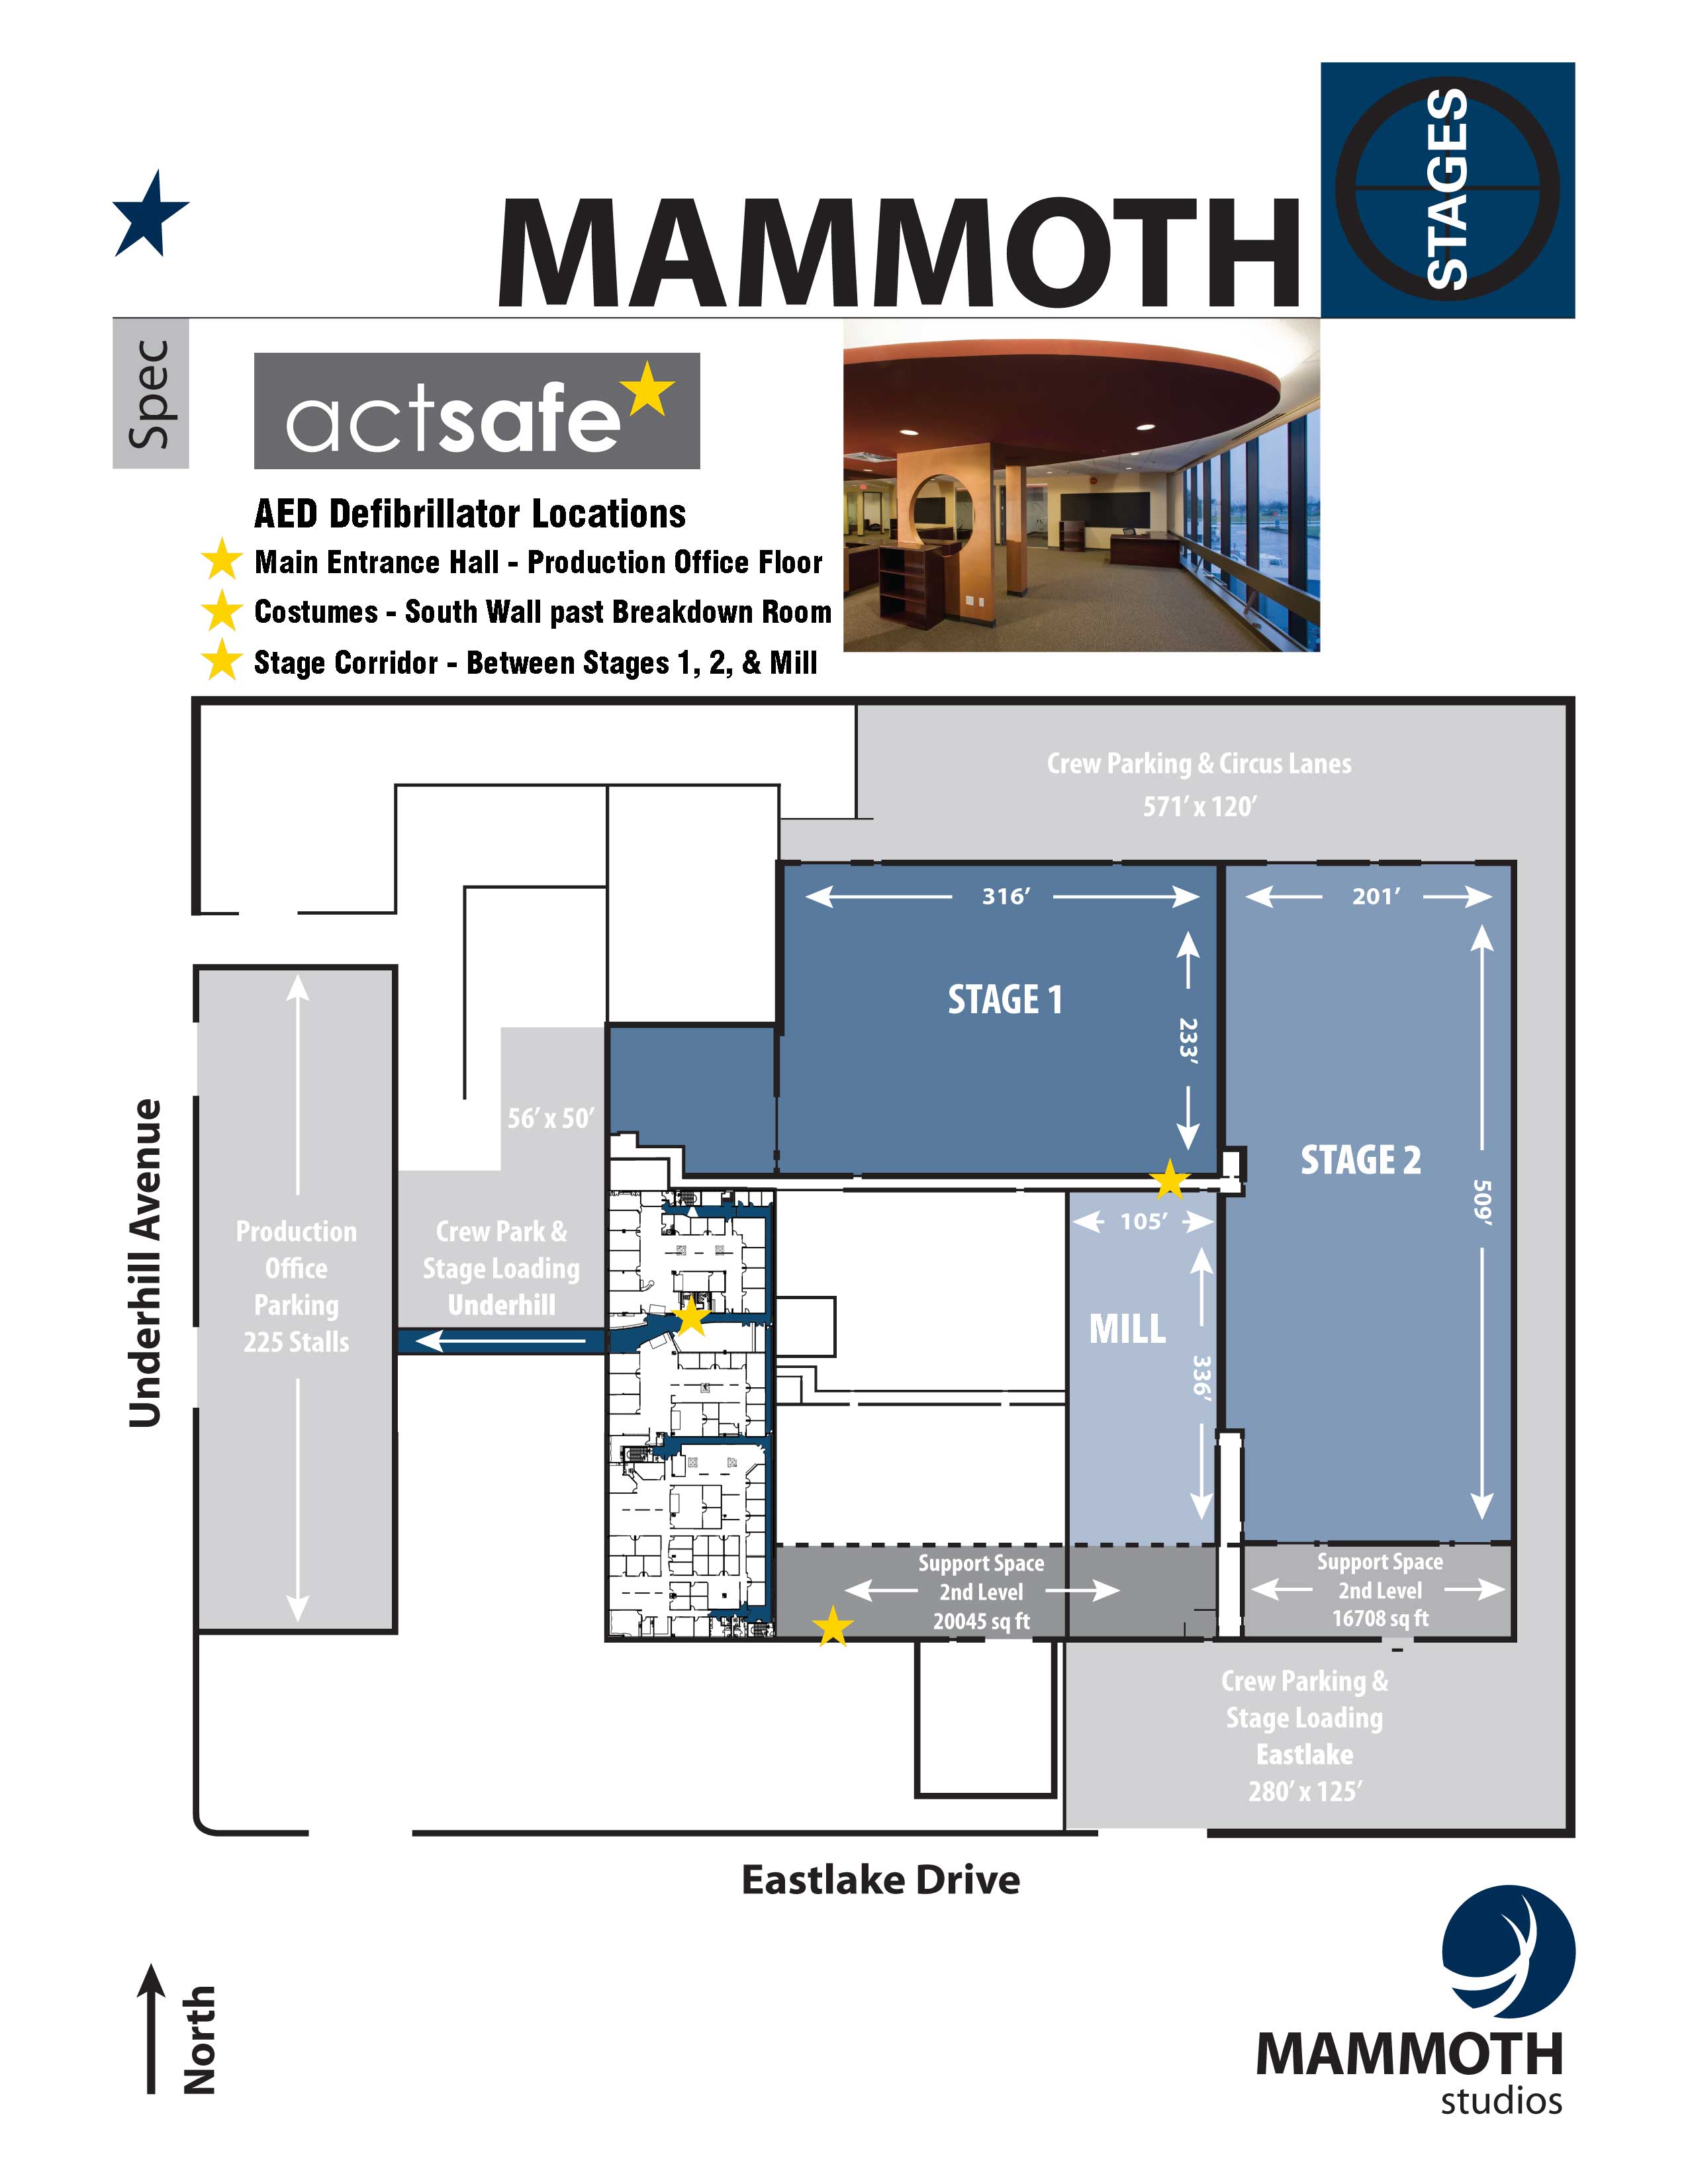 aed locations map in mammoth studios